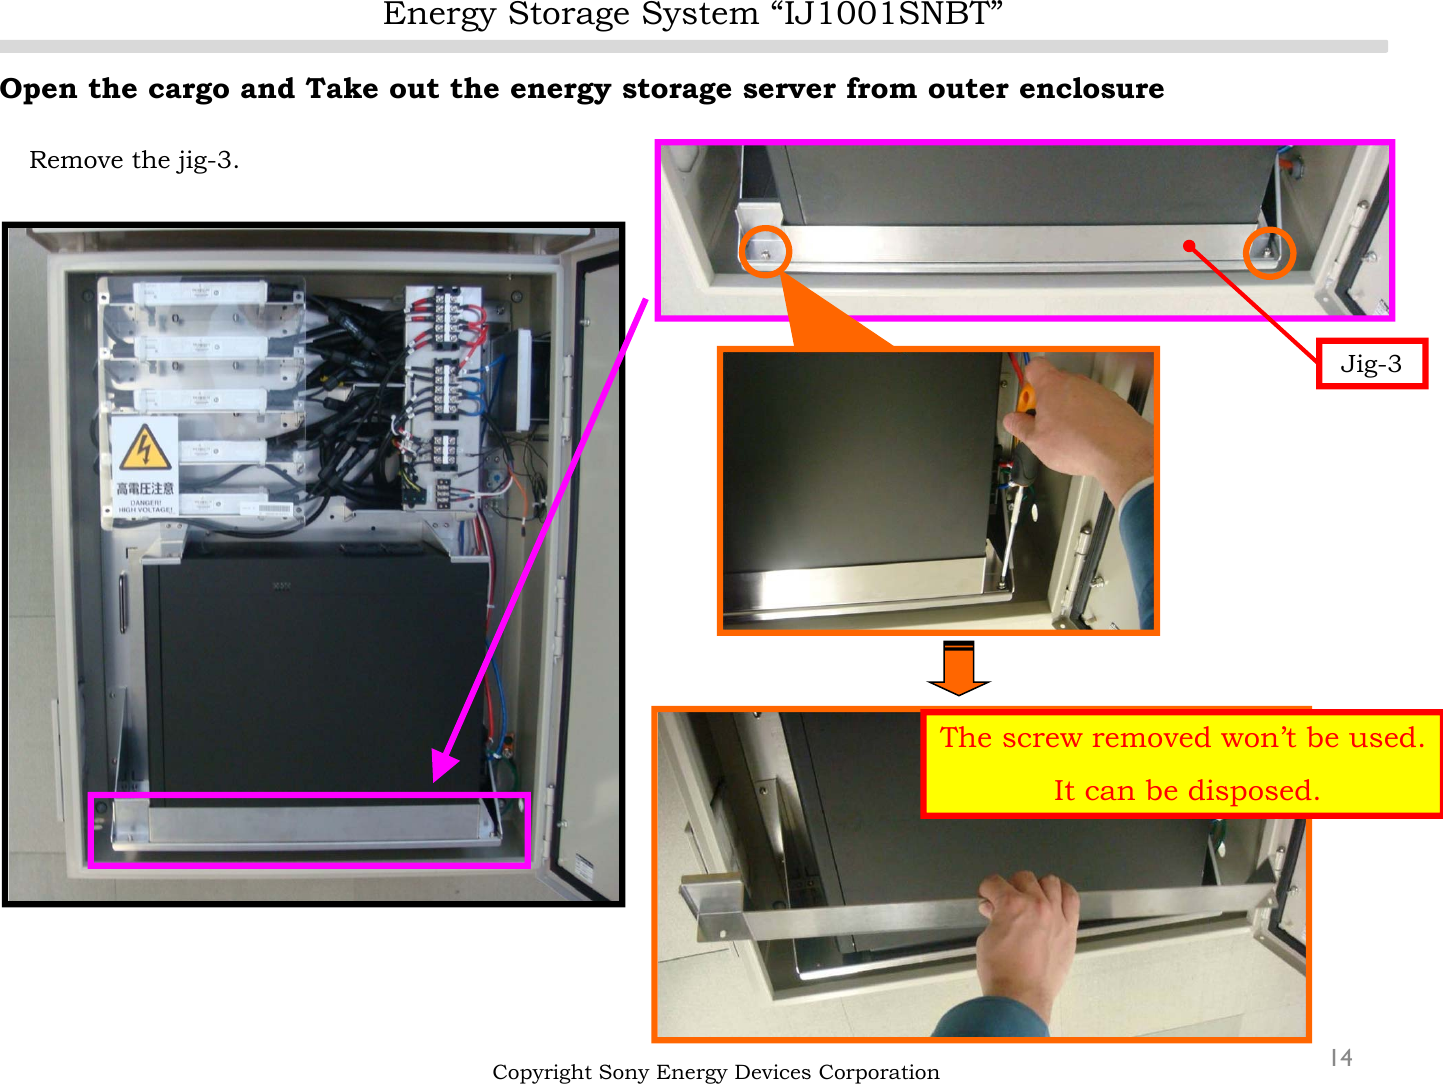 Energy Storage System “IJ1001SNBT”14Open the cargo and Take out the energy storage server from outer enclosureRemove the jig-3.Copyright Sony Energy Devices CorporationJig-3The screw removed won’t be used.It can be disposed.